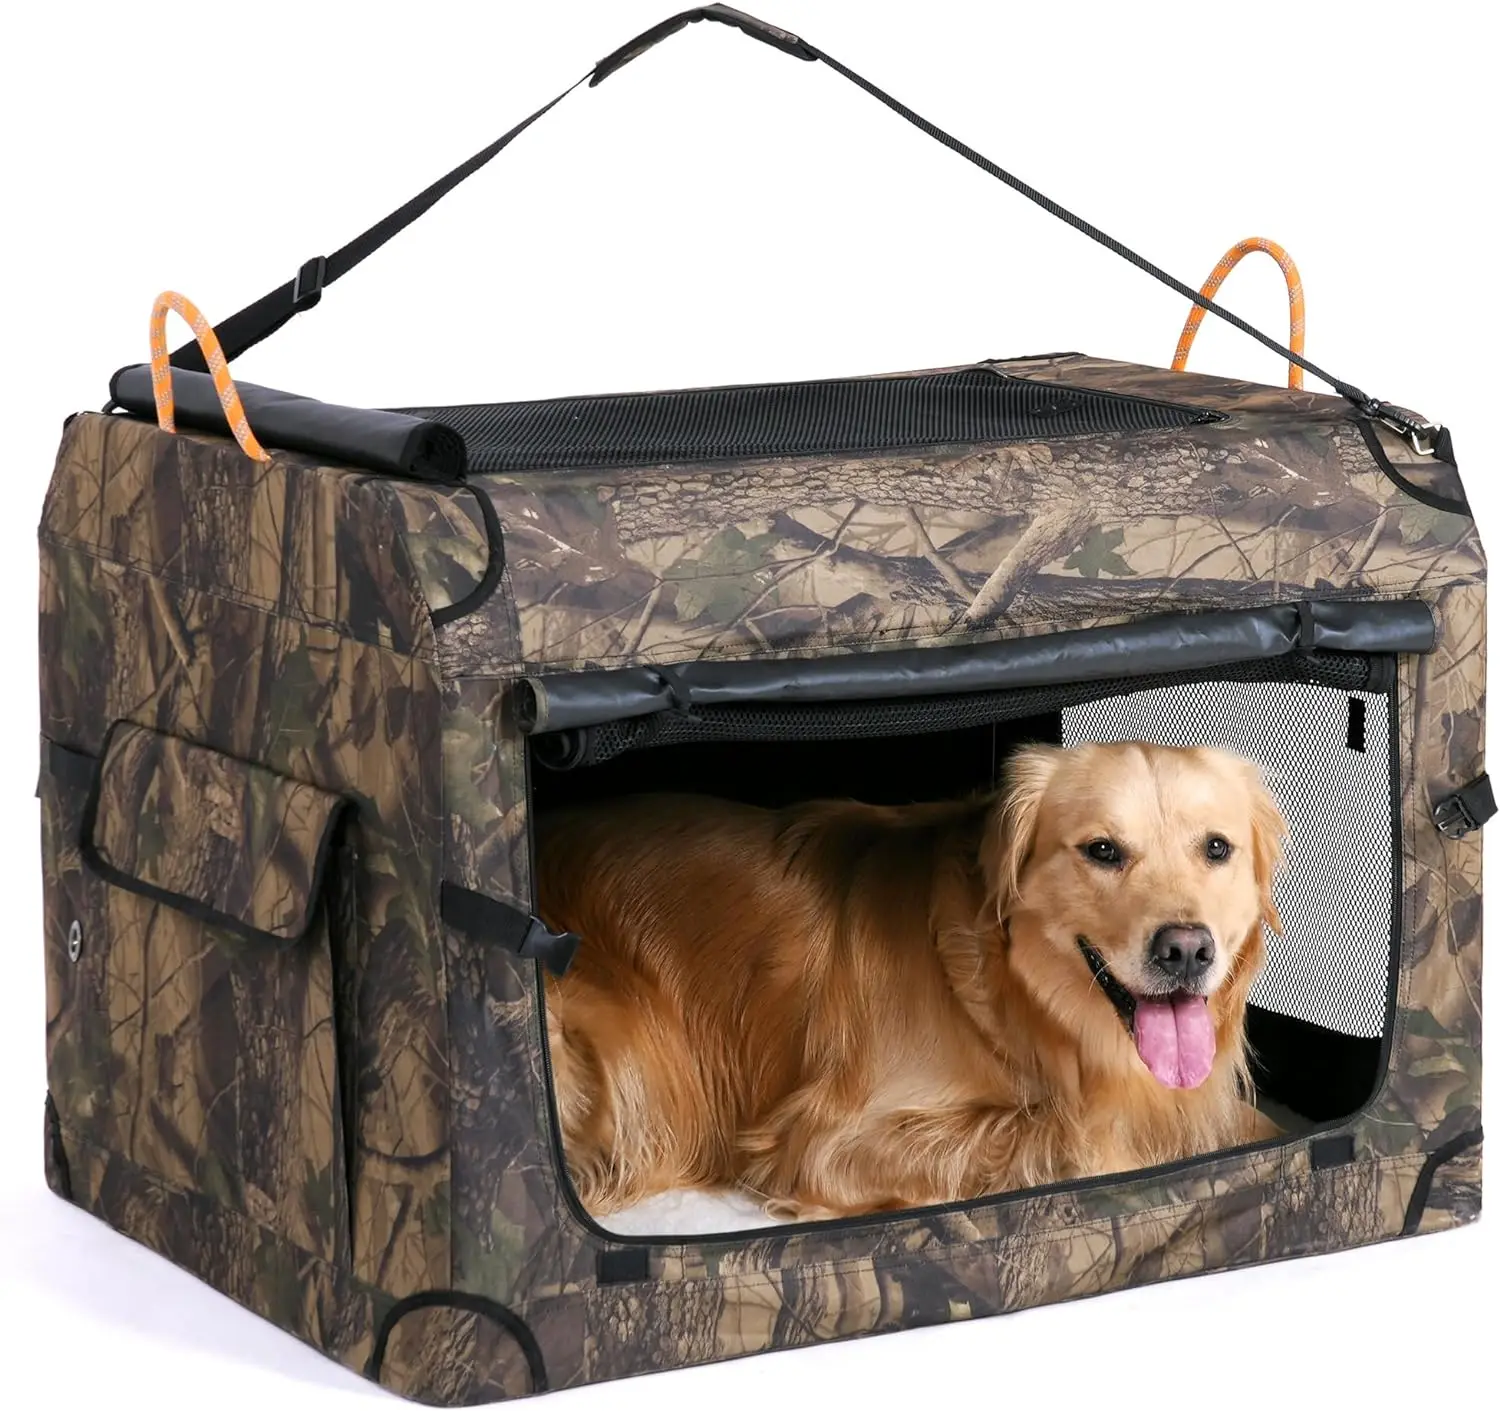 

KOOPRO 40 Inch Collapsible Dog Crate, Portable Soft-Sided Dog Travel Carrier Camouflage Style Pet Kennel 4-Door with Durable Mes